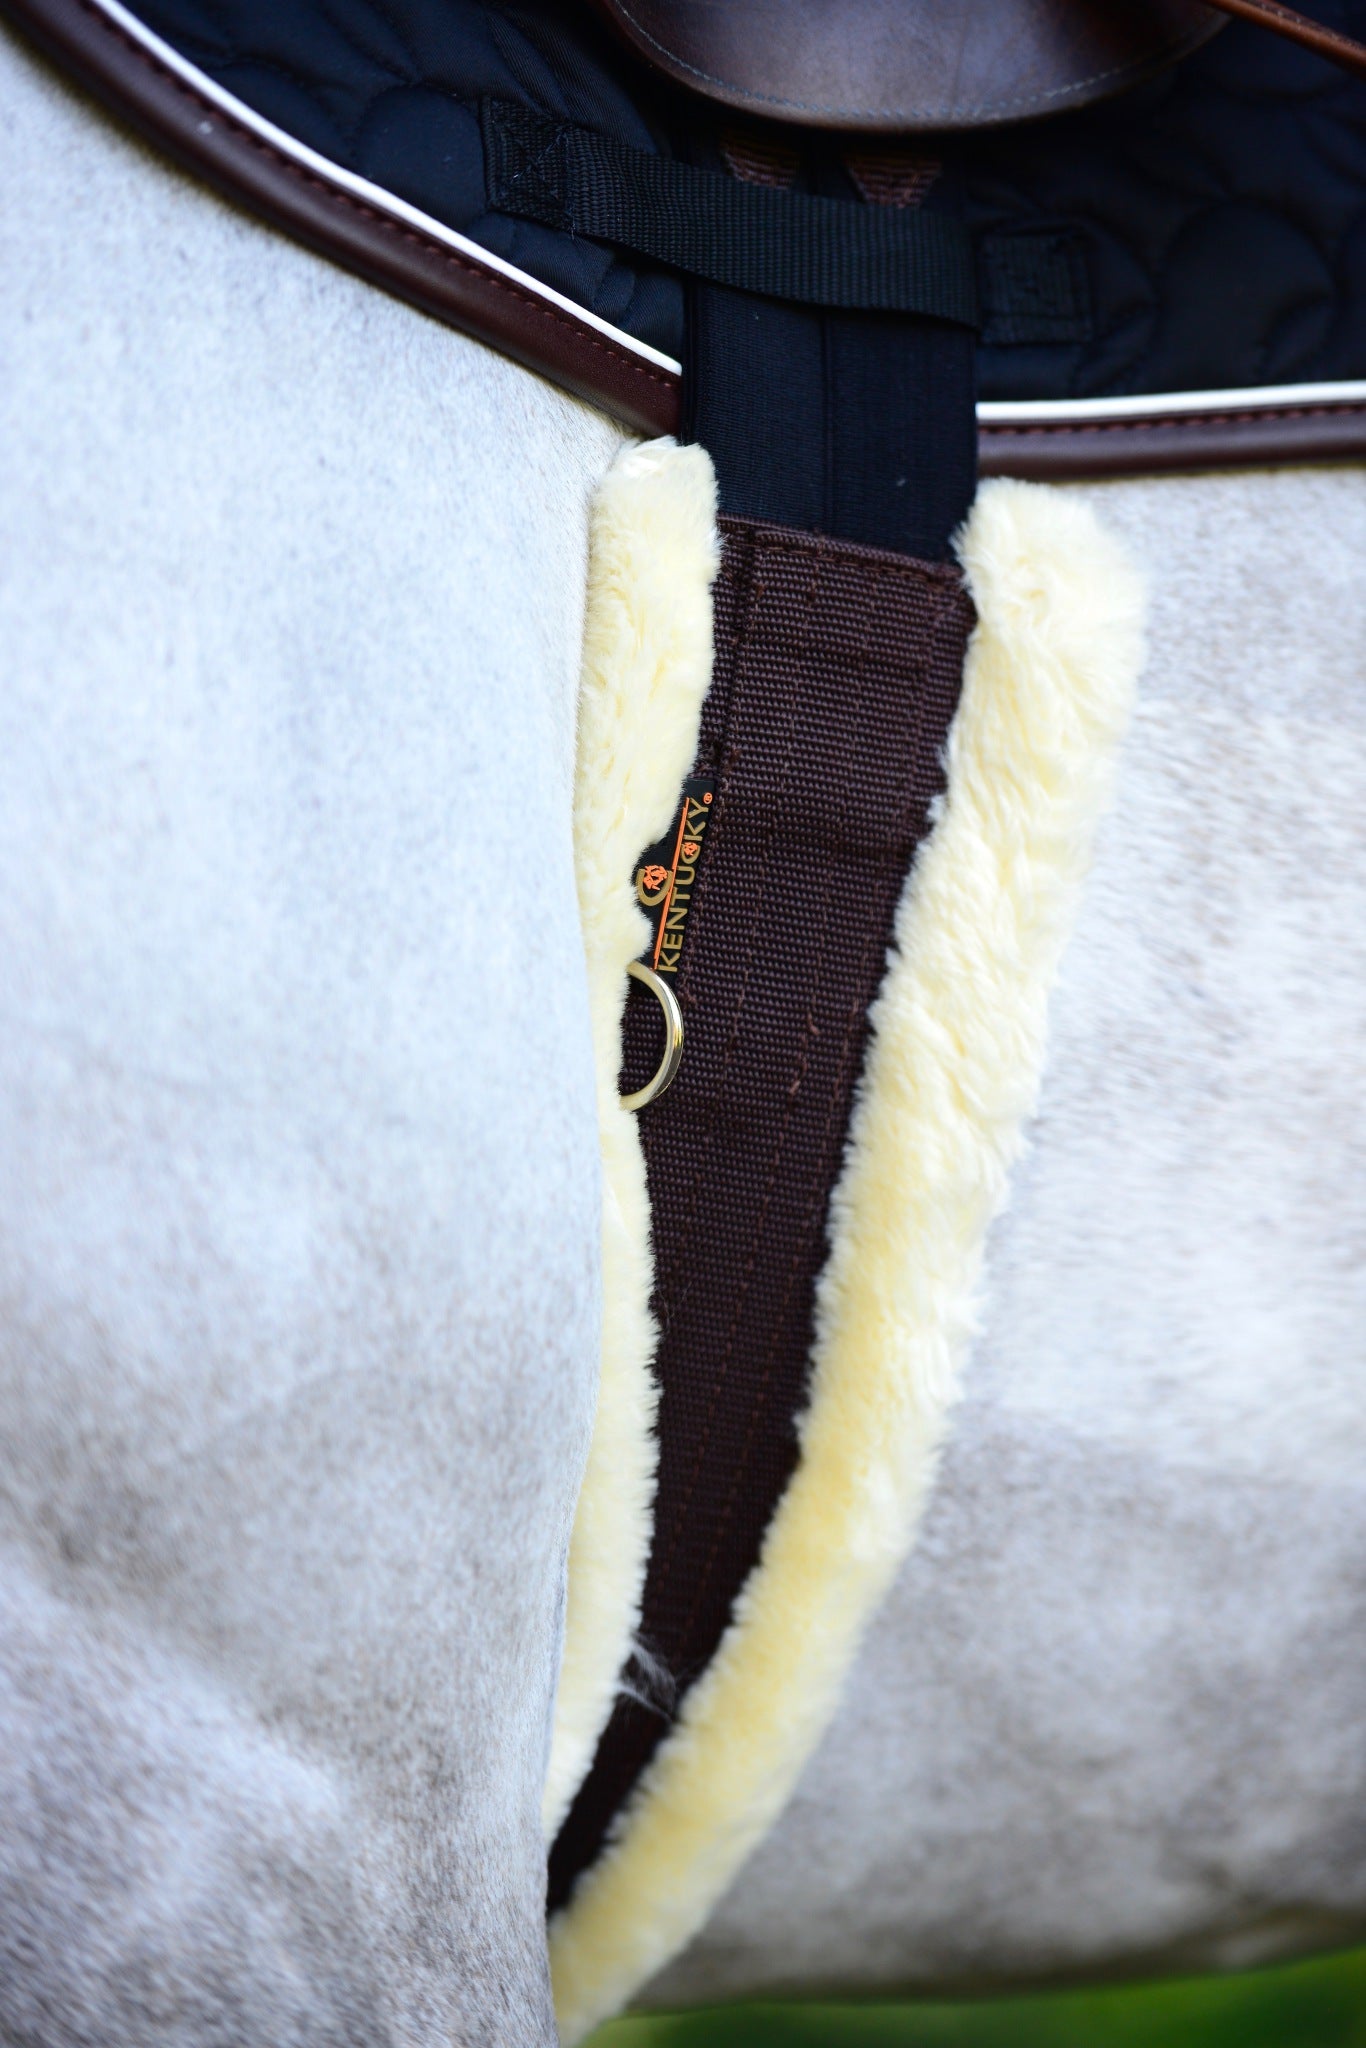 The Kentucky sheepskin Girth with nylon fleece lining is one of Kentuckys classic products thanks to its many qualities! Words like flexibility, softness, resistance, lightness and comfort describe this girth perfectly.